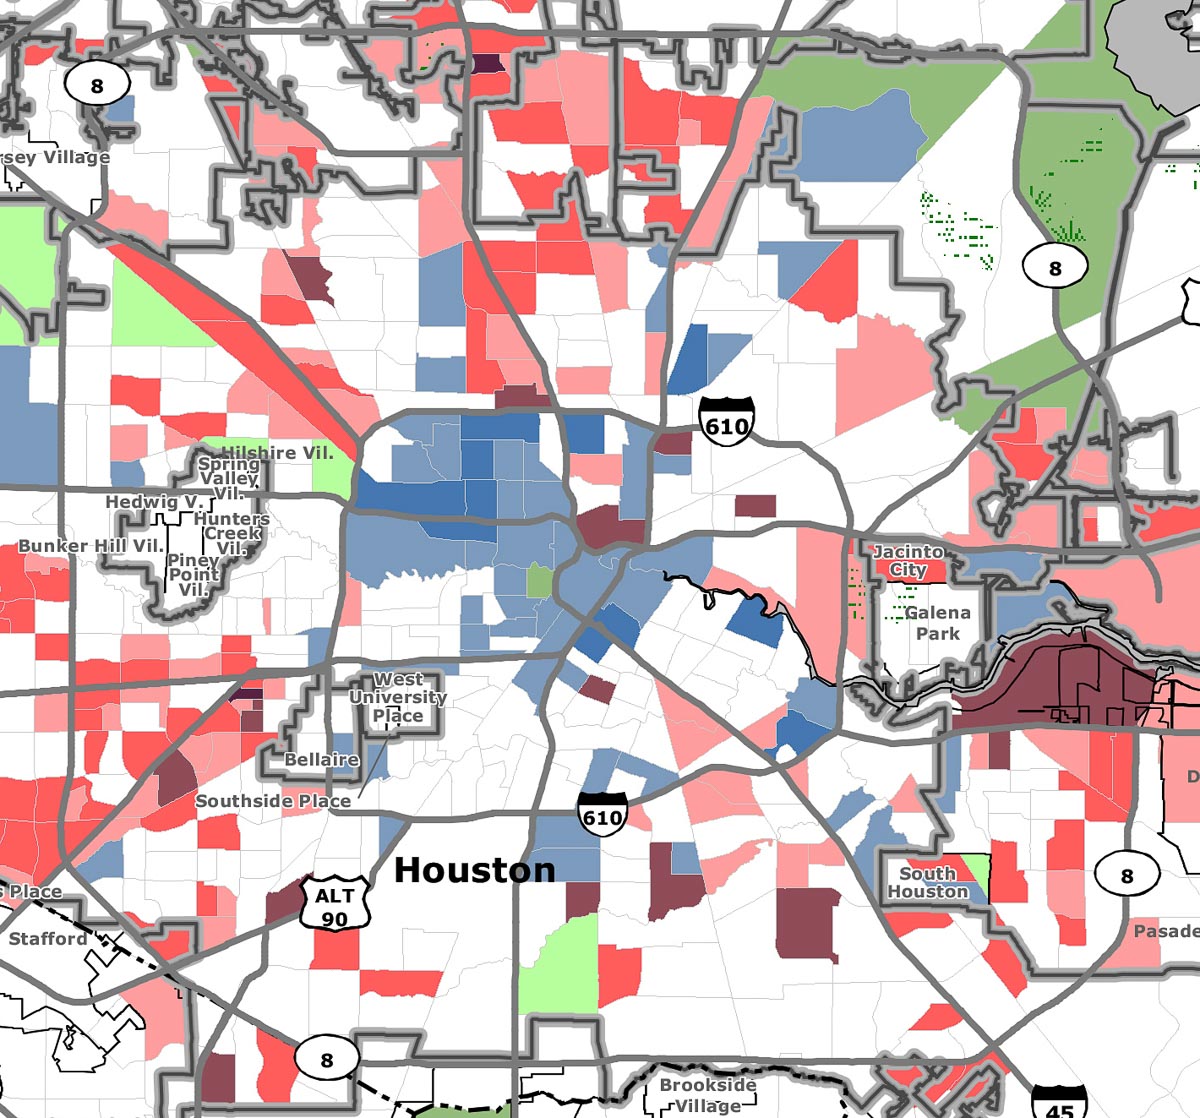 Low income displacement and concentration in Houston by census tract